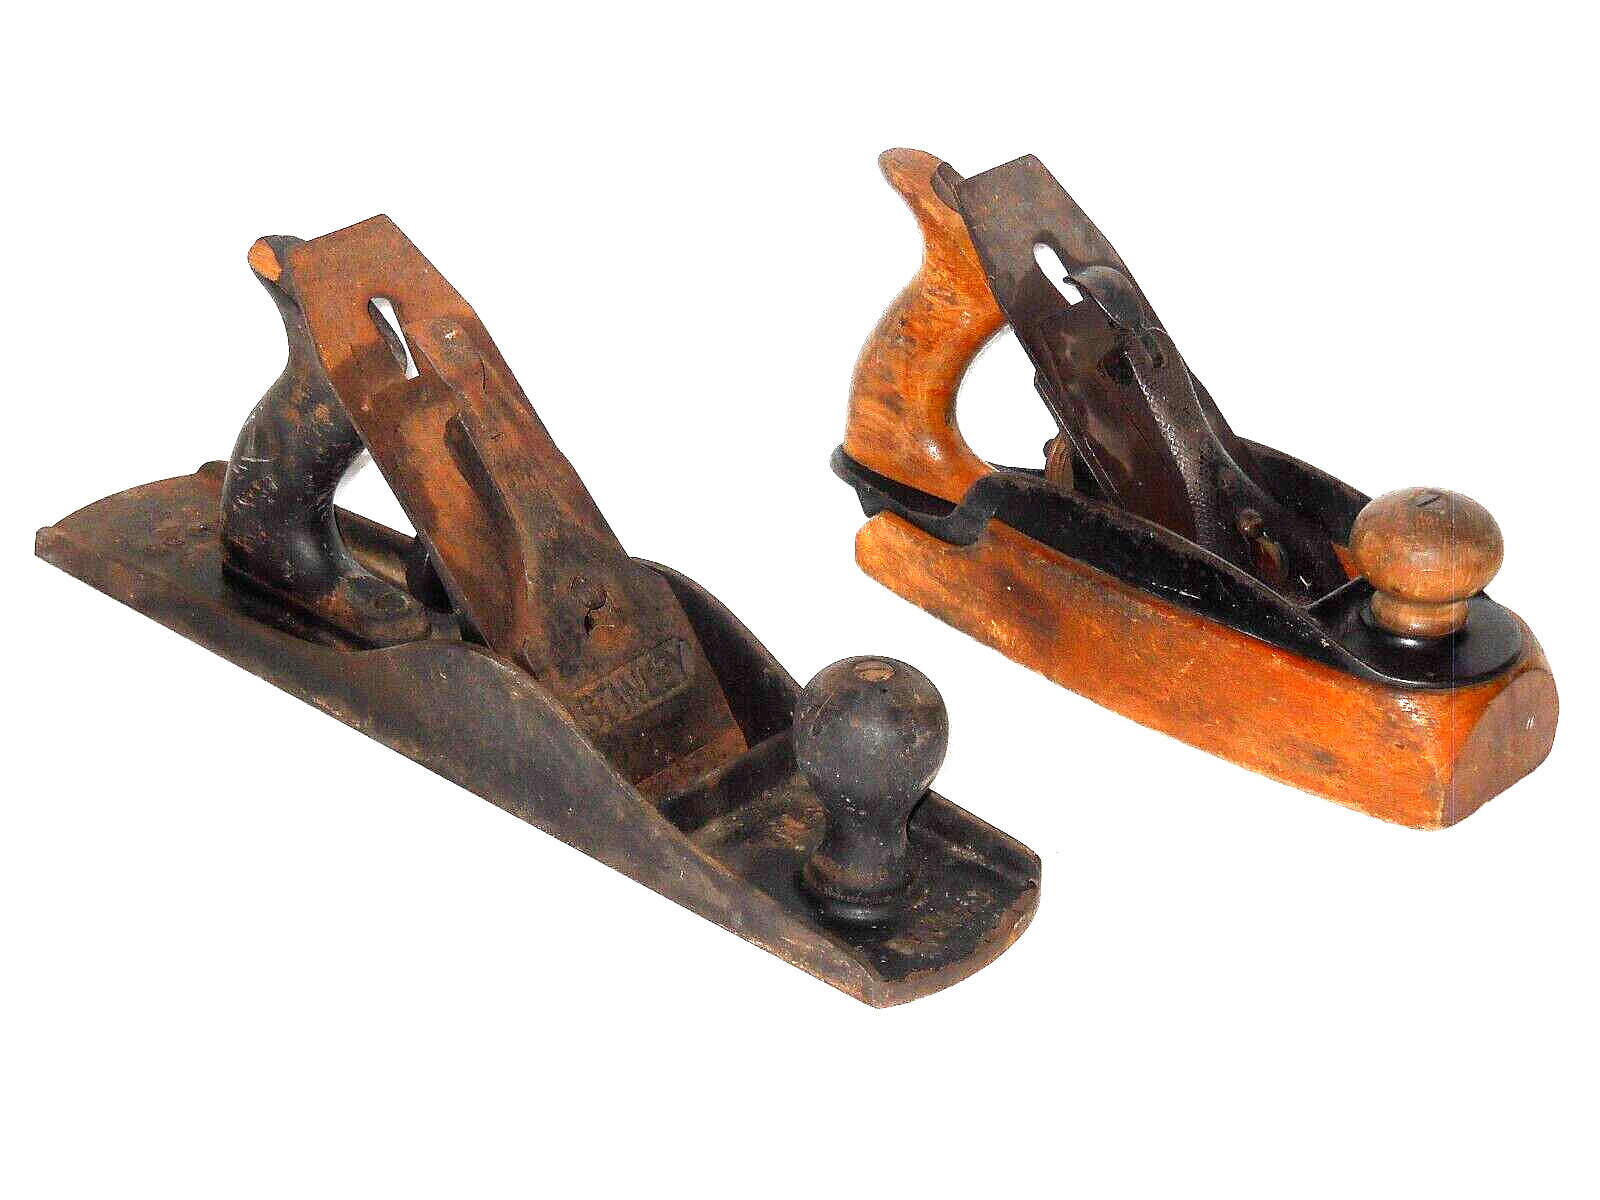 2 VINTAGE STANLEY WOOD PLANES PLANERS BAILEY NO. 5-1/2 SMOOTH RULE & LEVEL CO 36